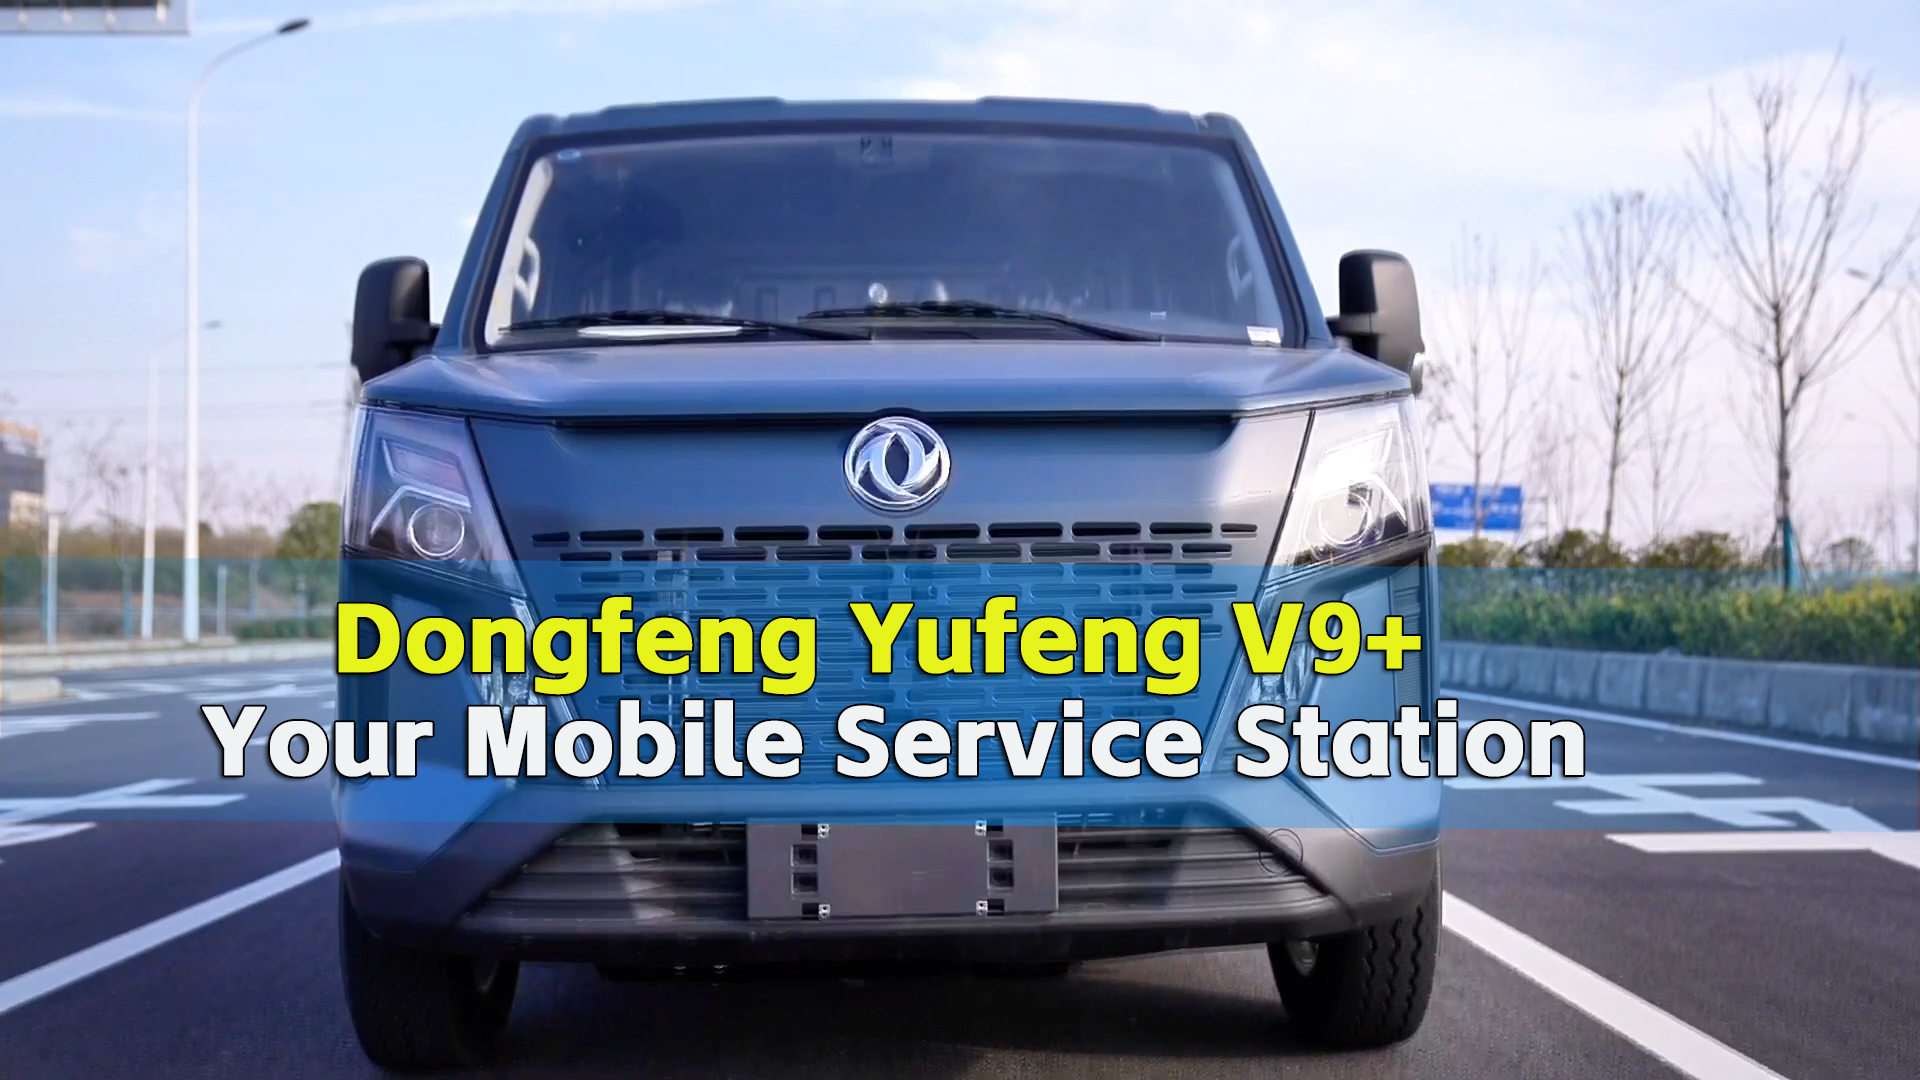 Dongfeng Yufeng V9+, Your Mobile Service Station